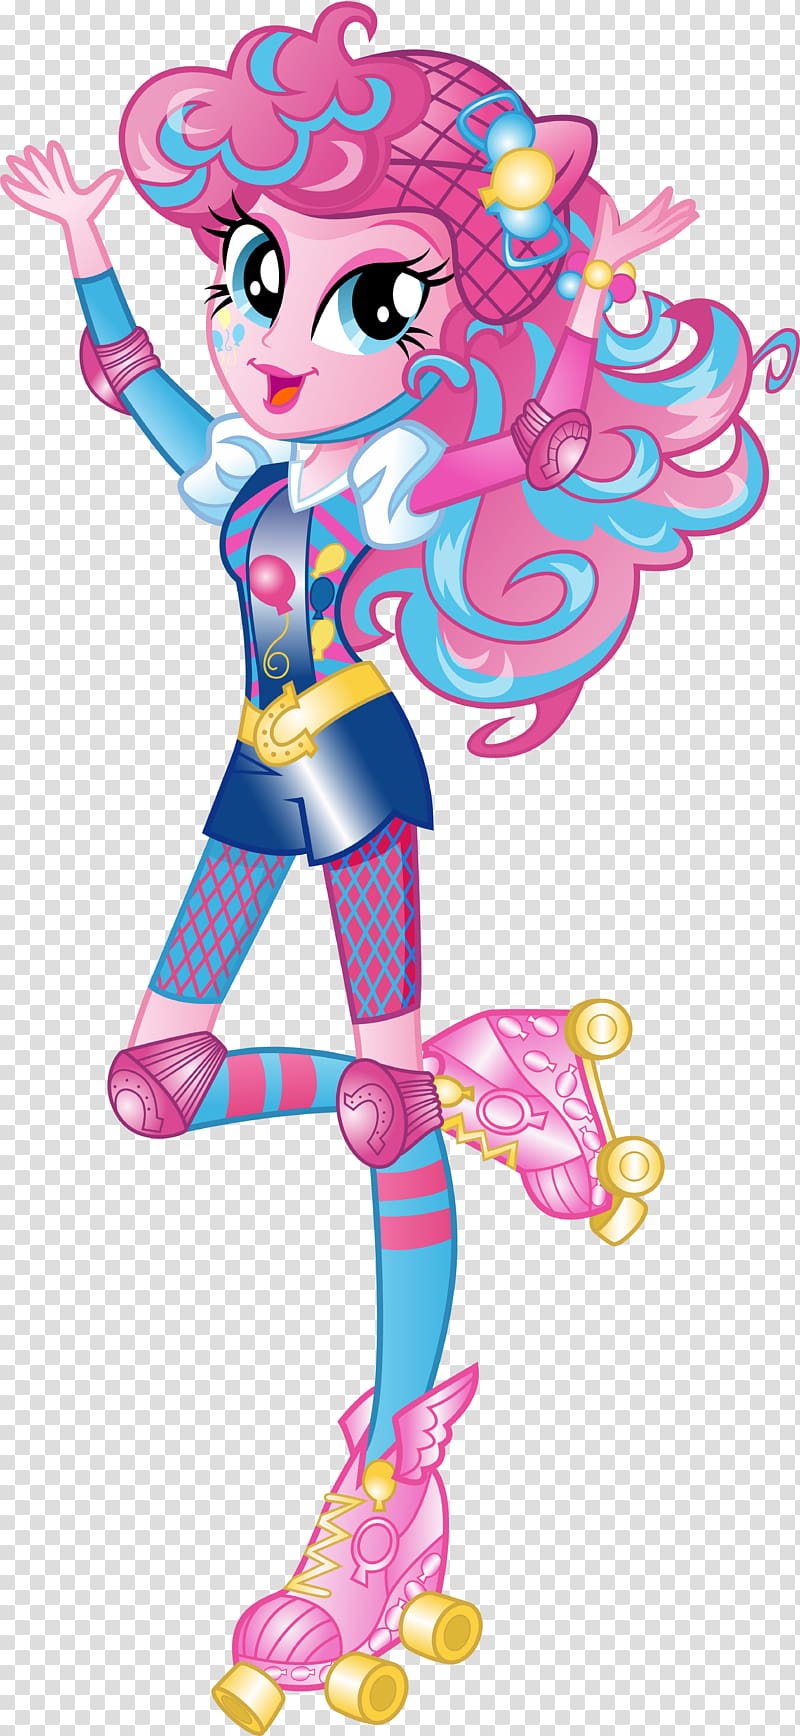 Pinkie Pie Rarity Rainbow Dash My Little Pony: Equestria Girls, roller skater transparent background PNG clipart